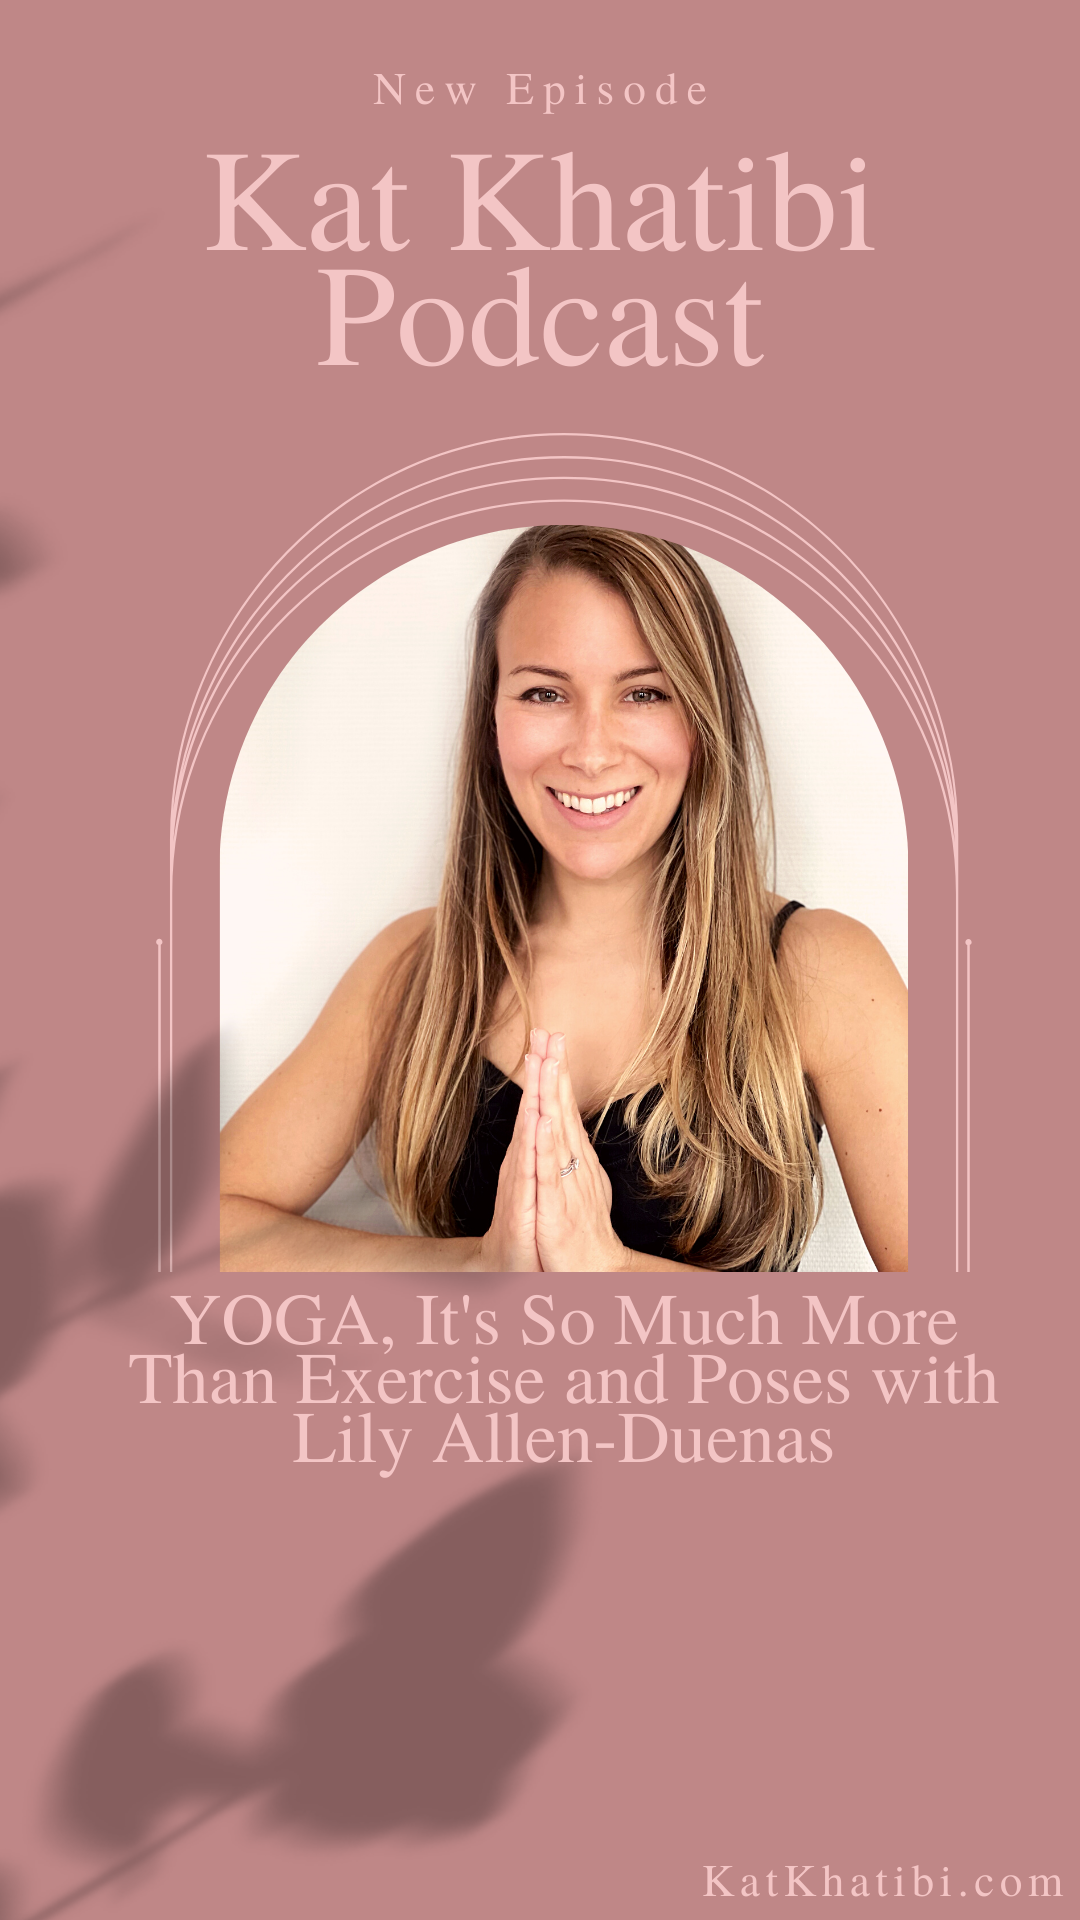 YOGA, It's So Much More Than Exercise and Poses with Lily Allen-Duenas